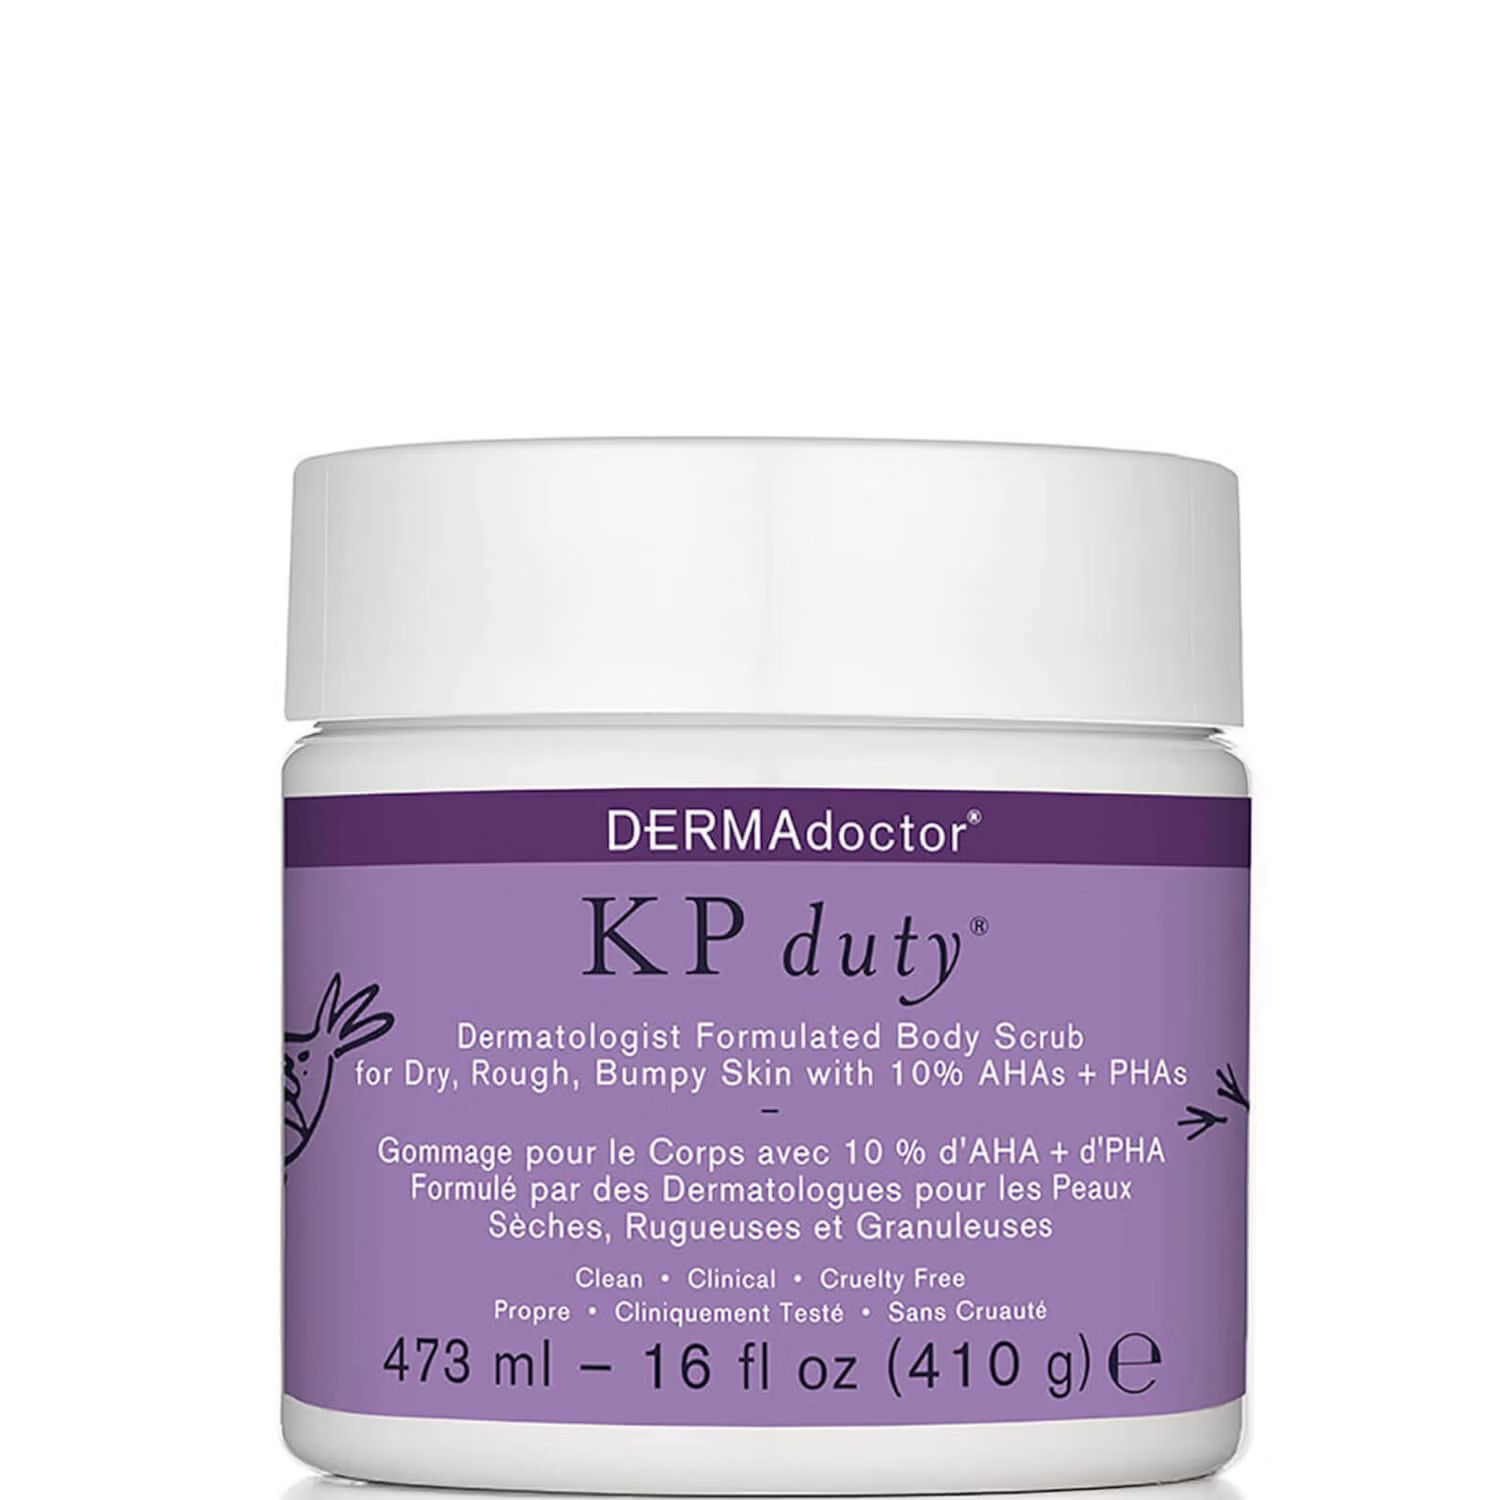 DERMAdoctor KP Duty Dermatologist Formulated Body Scrub (Various Sizes) | Skincare RX